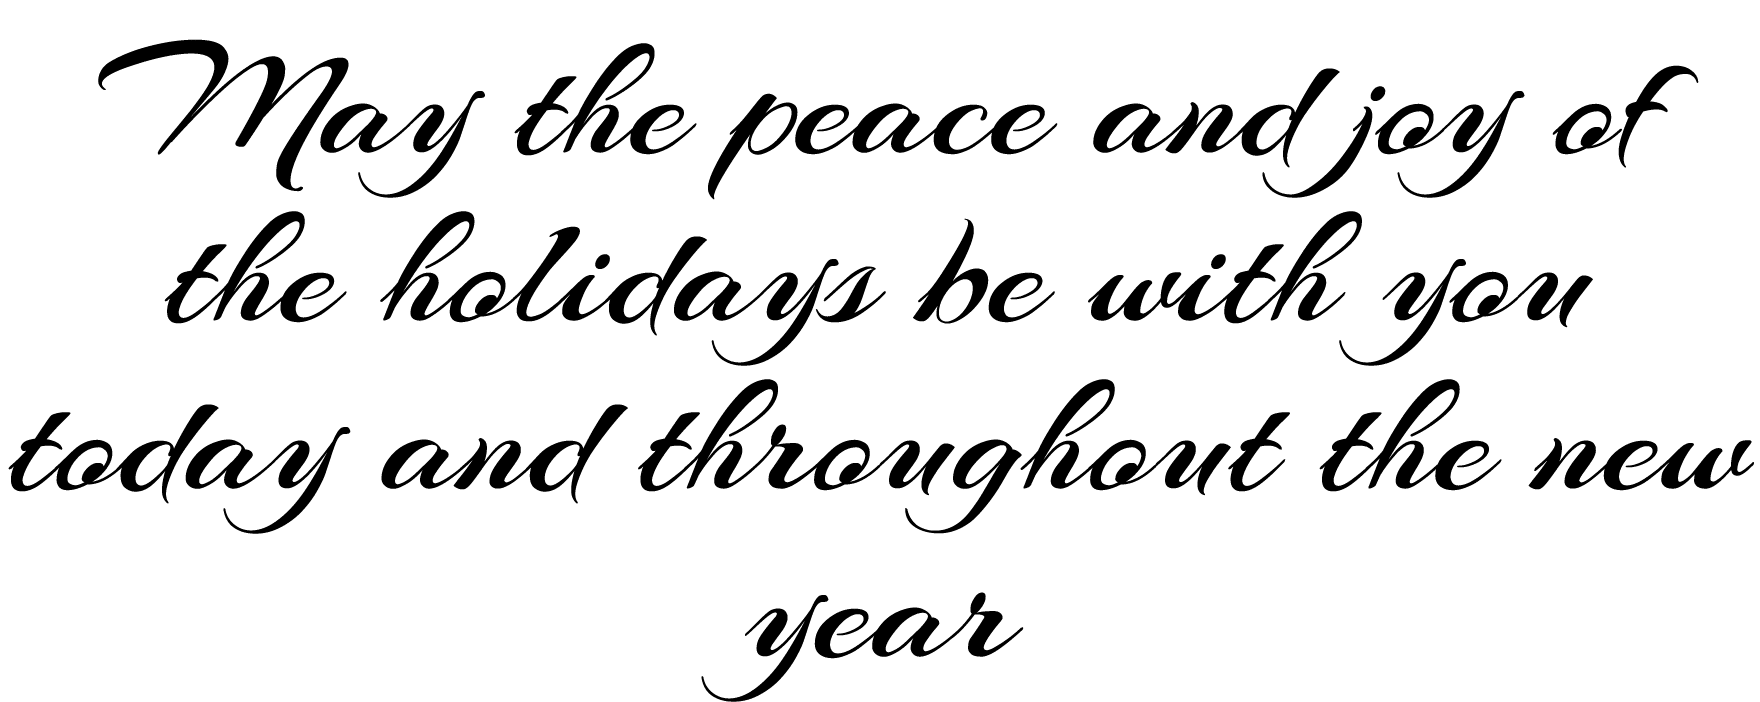 May the peace and joy of the holidays be with you today and throughout the new year